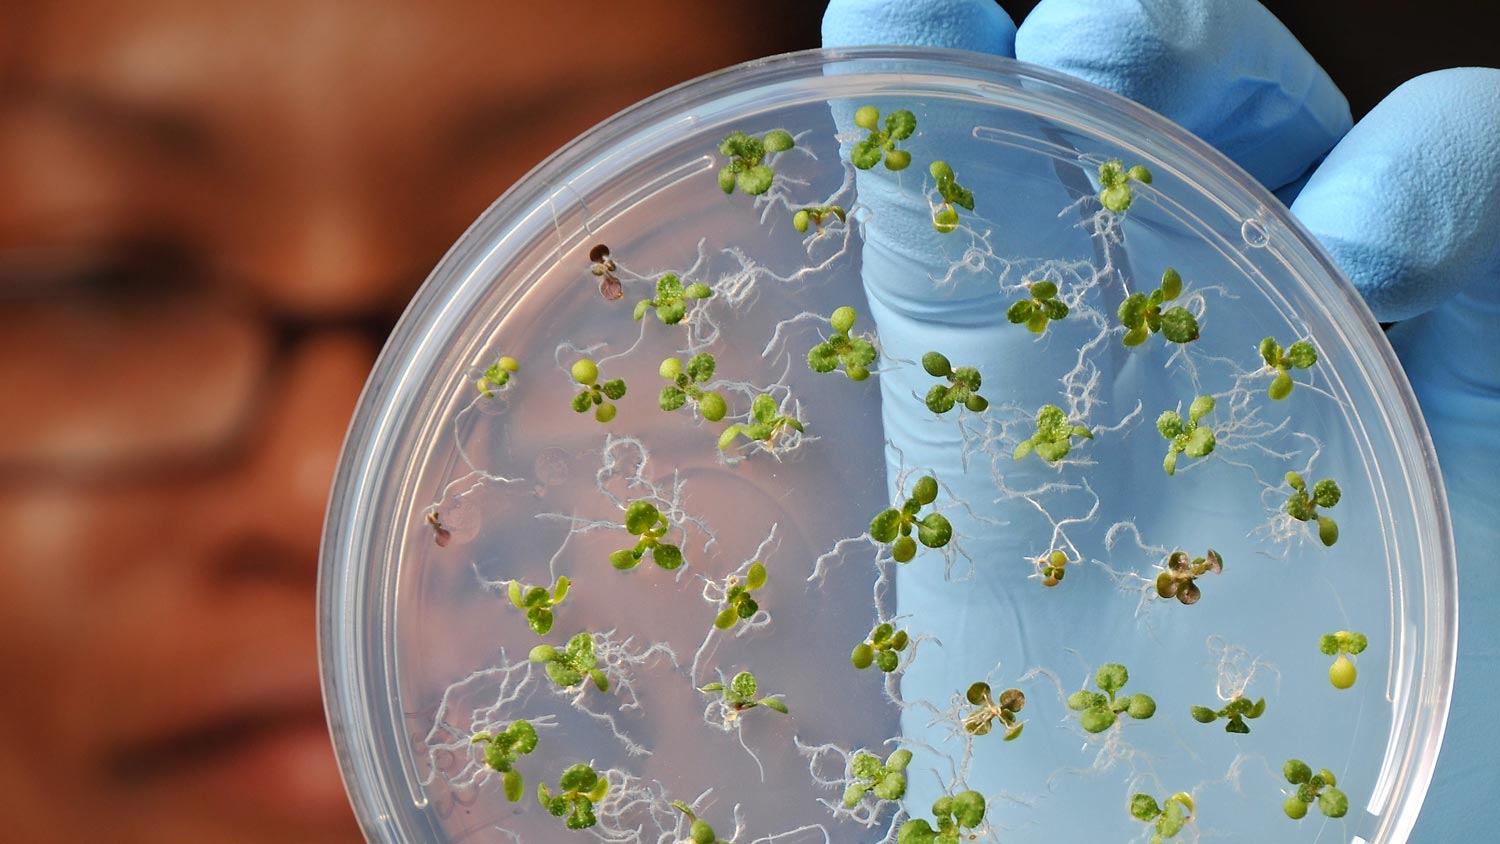 A researcher holds up a petri dish of sprouting seedlings for a close-up.